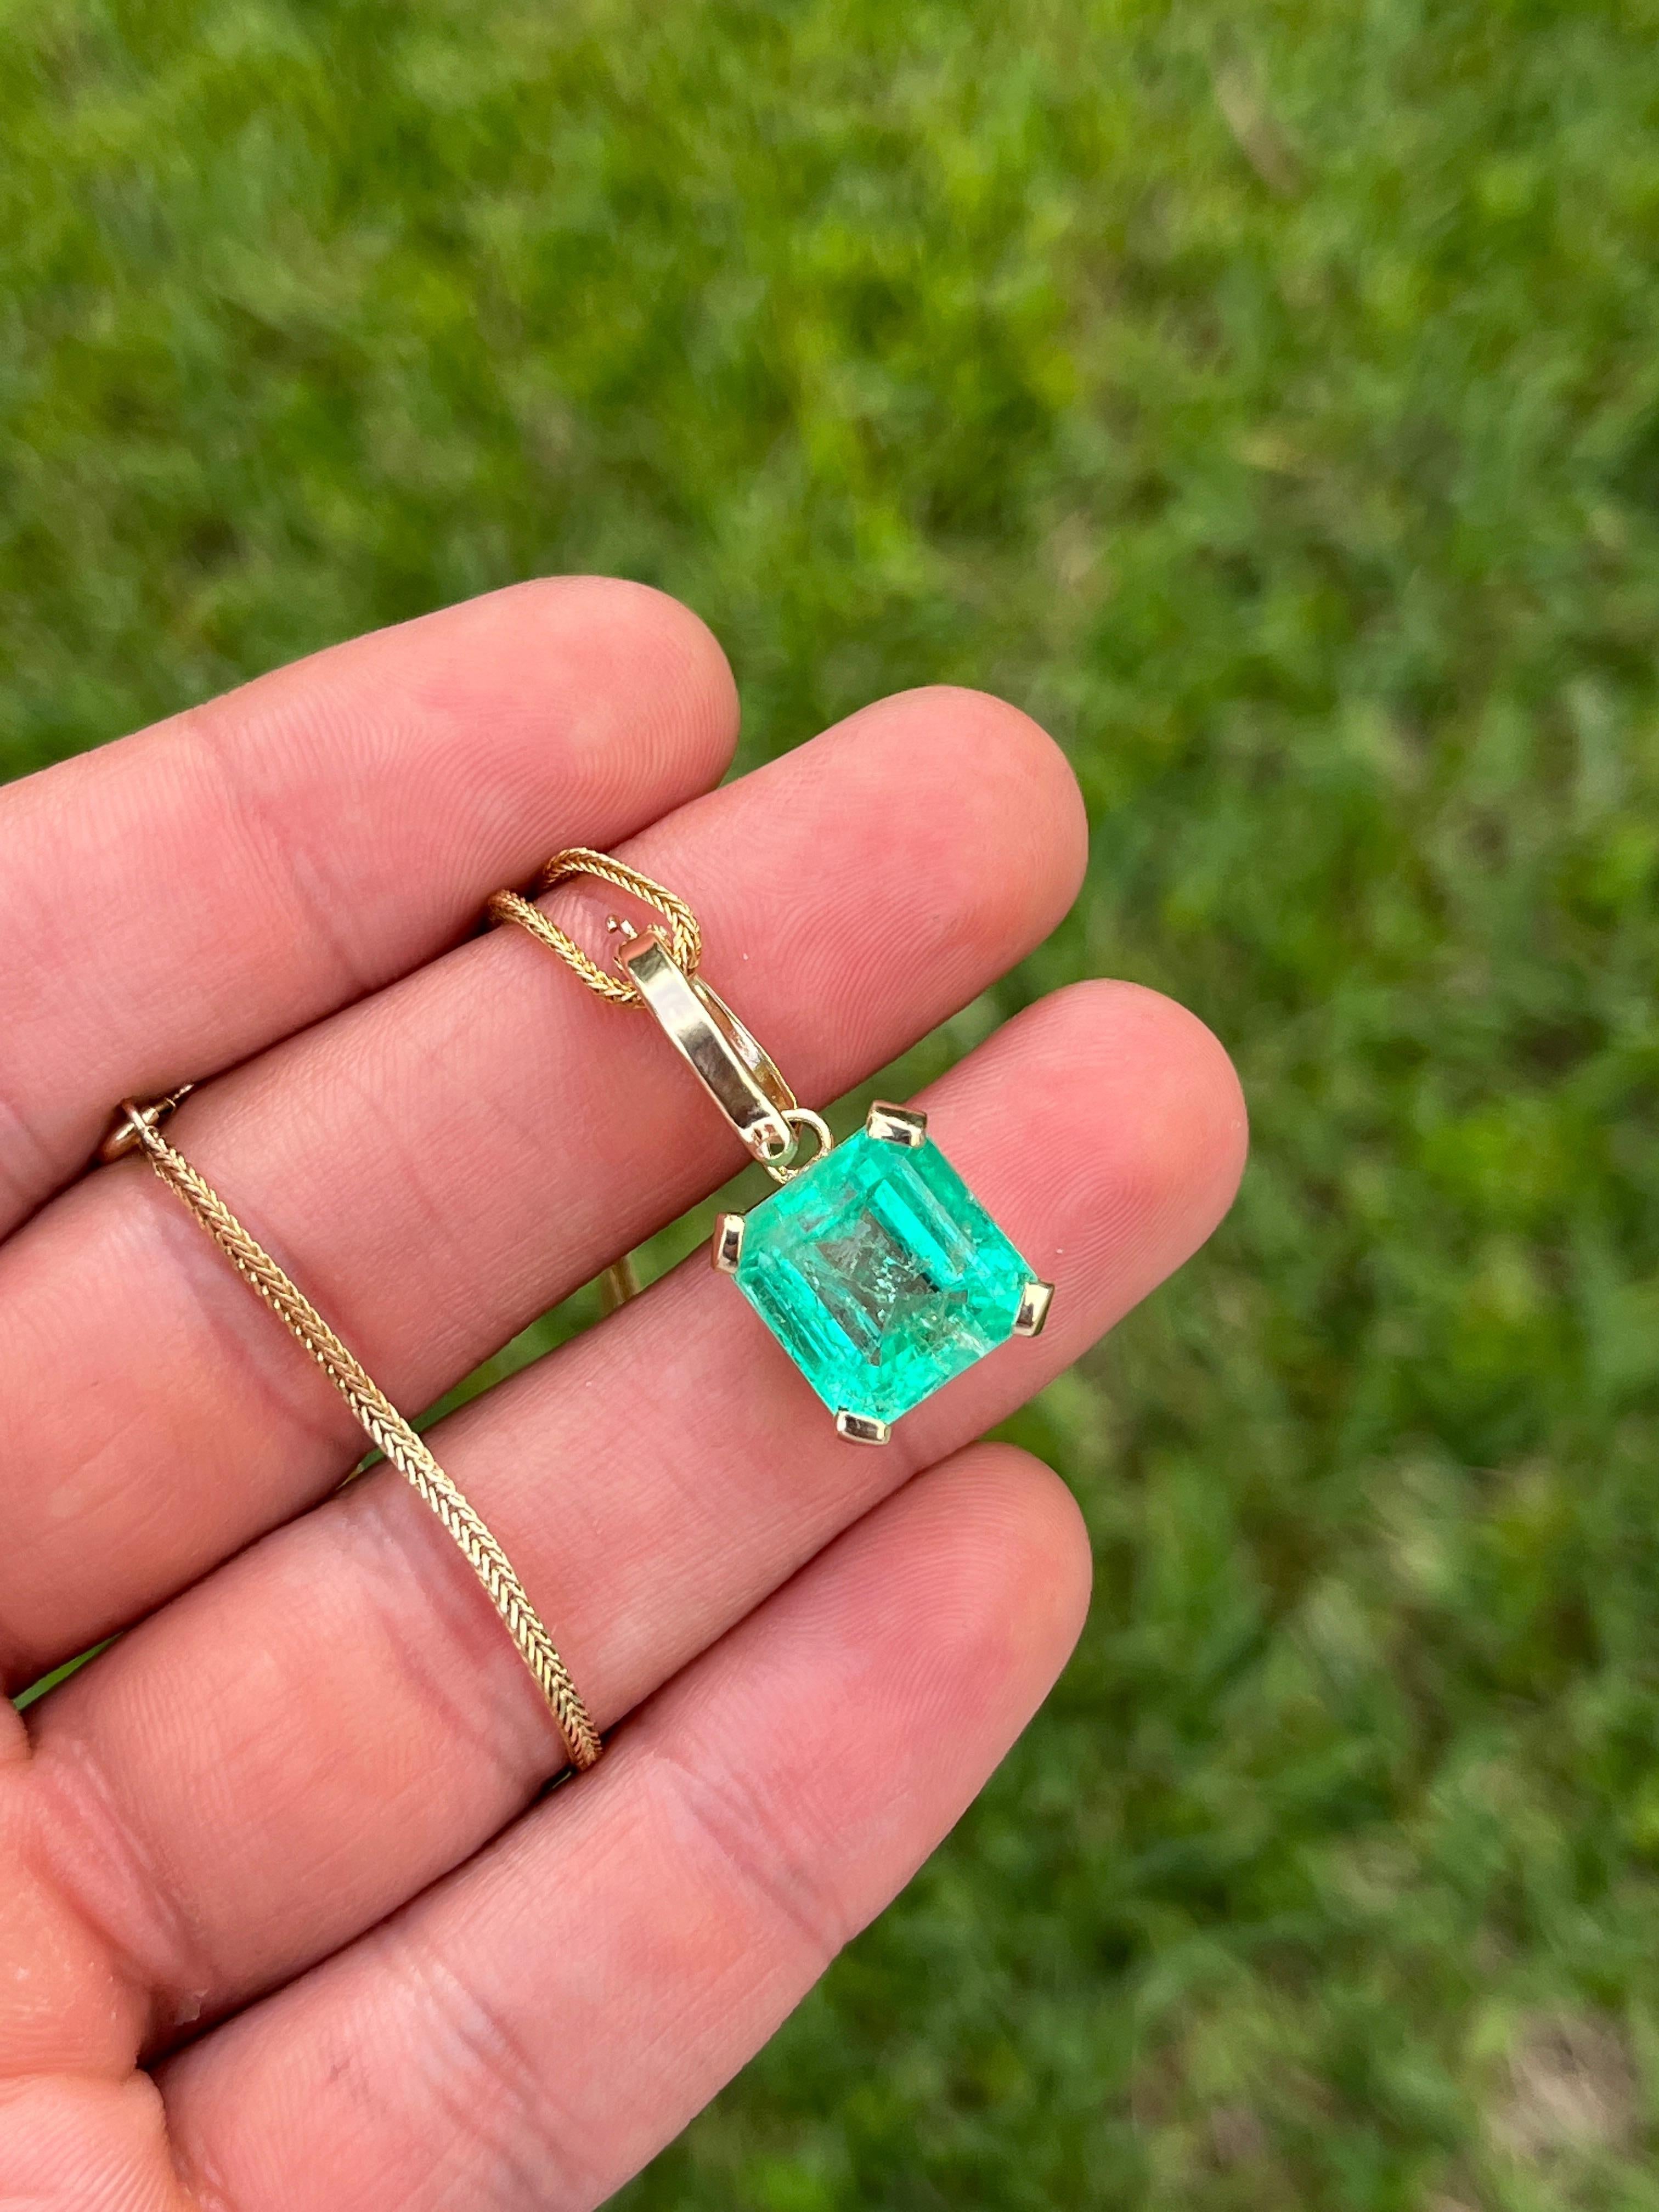 8.34-carat Colombian Emerald solitaire pendant set in 14k gold basket 4-prong mounting. Comes with a detachable bail that fits any chain up to 6mm. Original bail fits 1mm-1.5mm chain. 

The emerald center stone features excellent color, luster, and